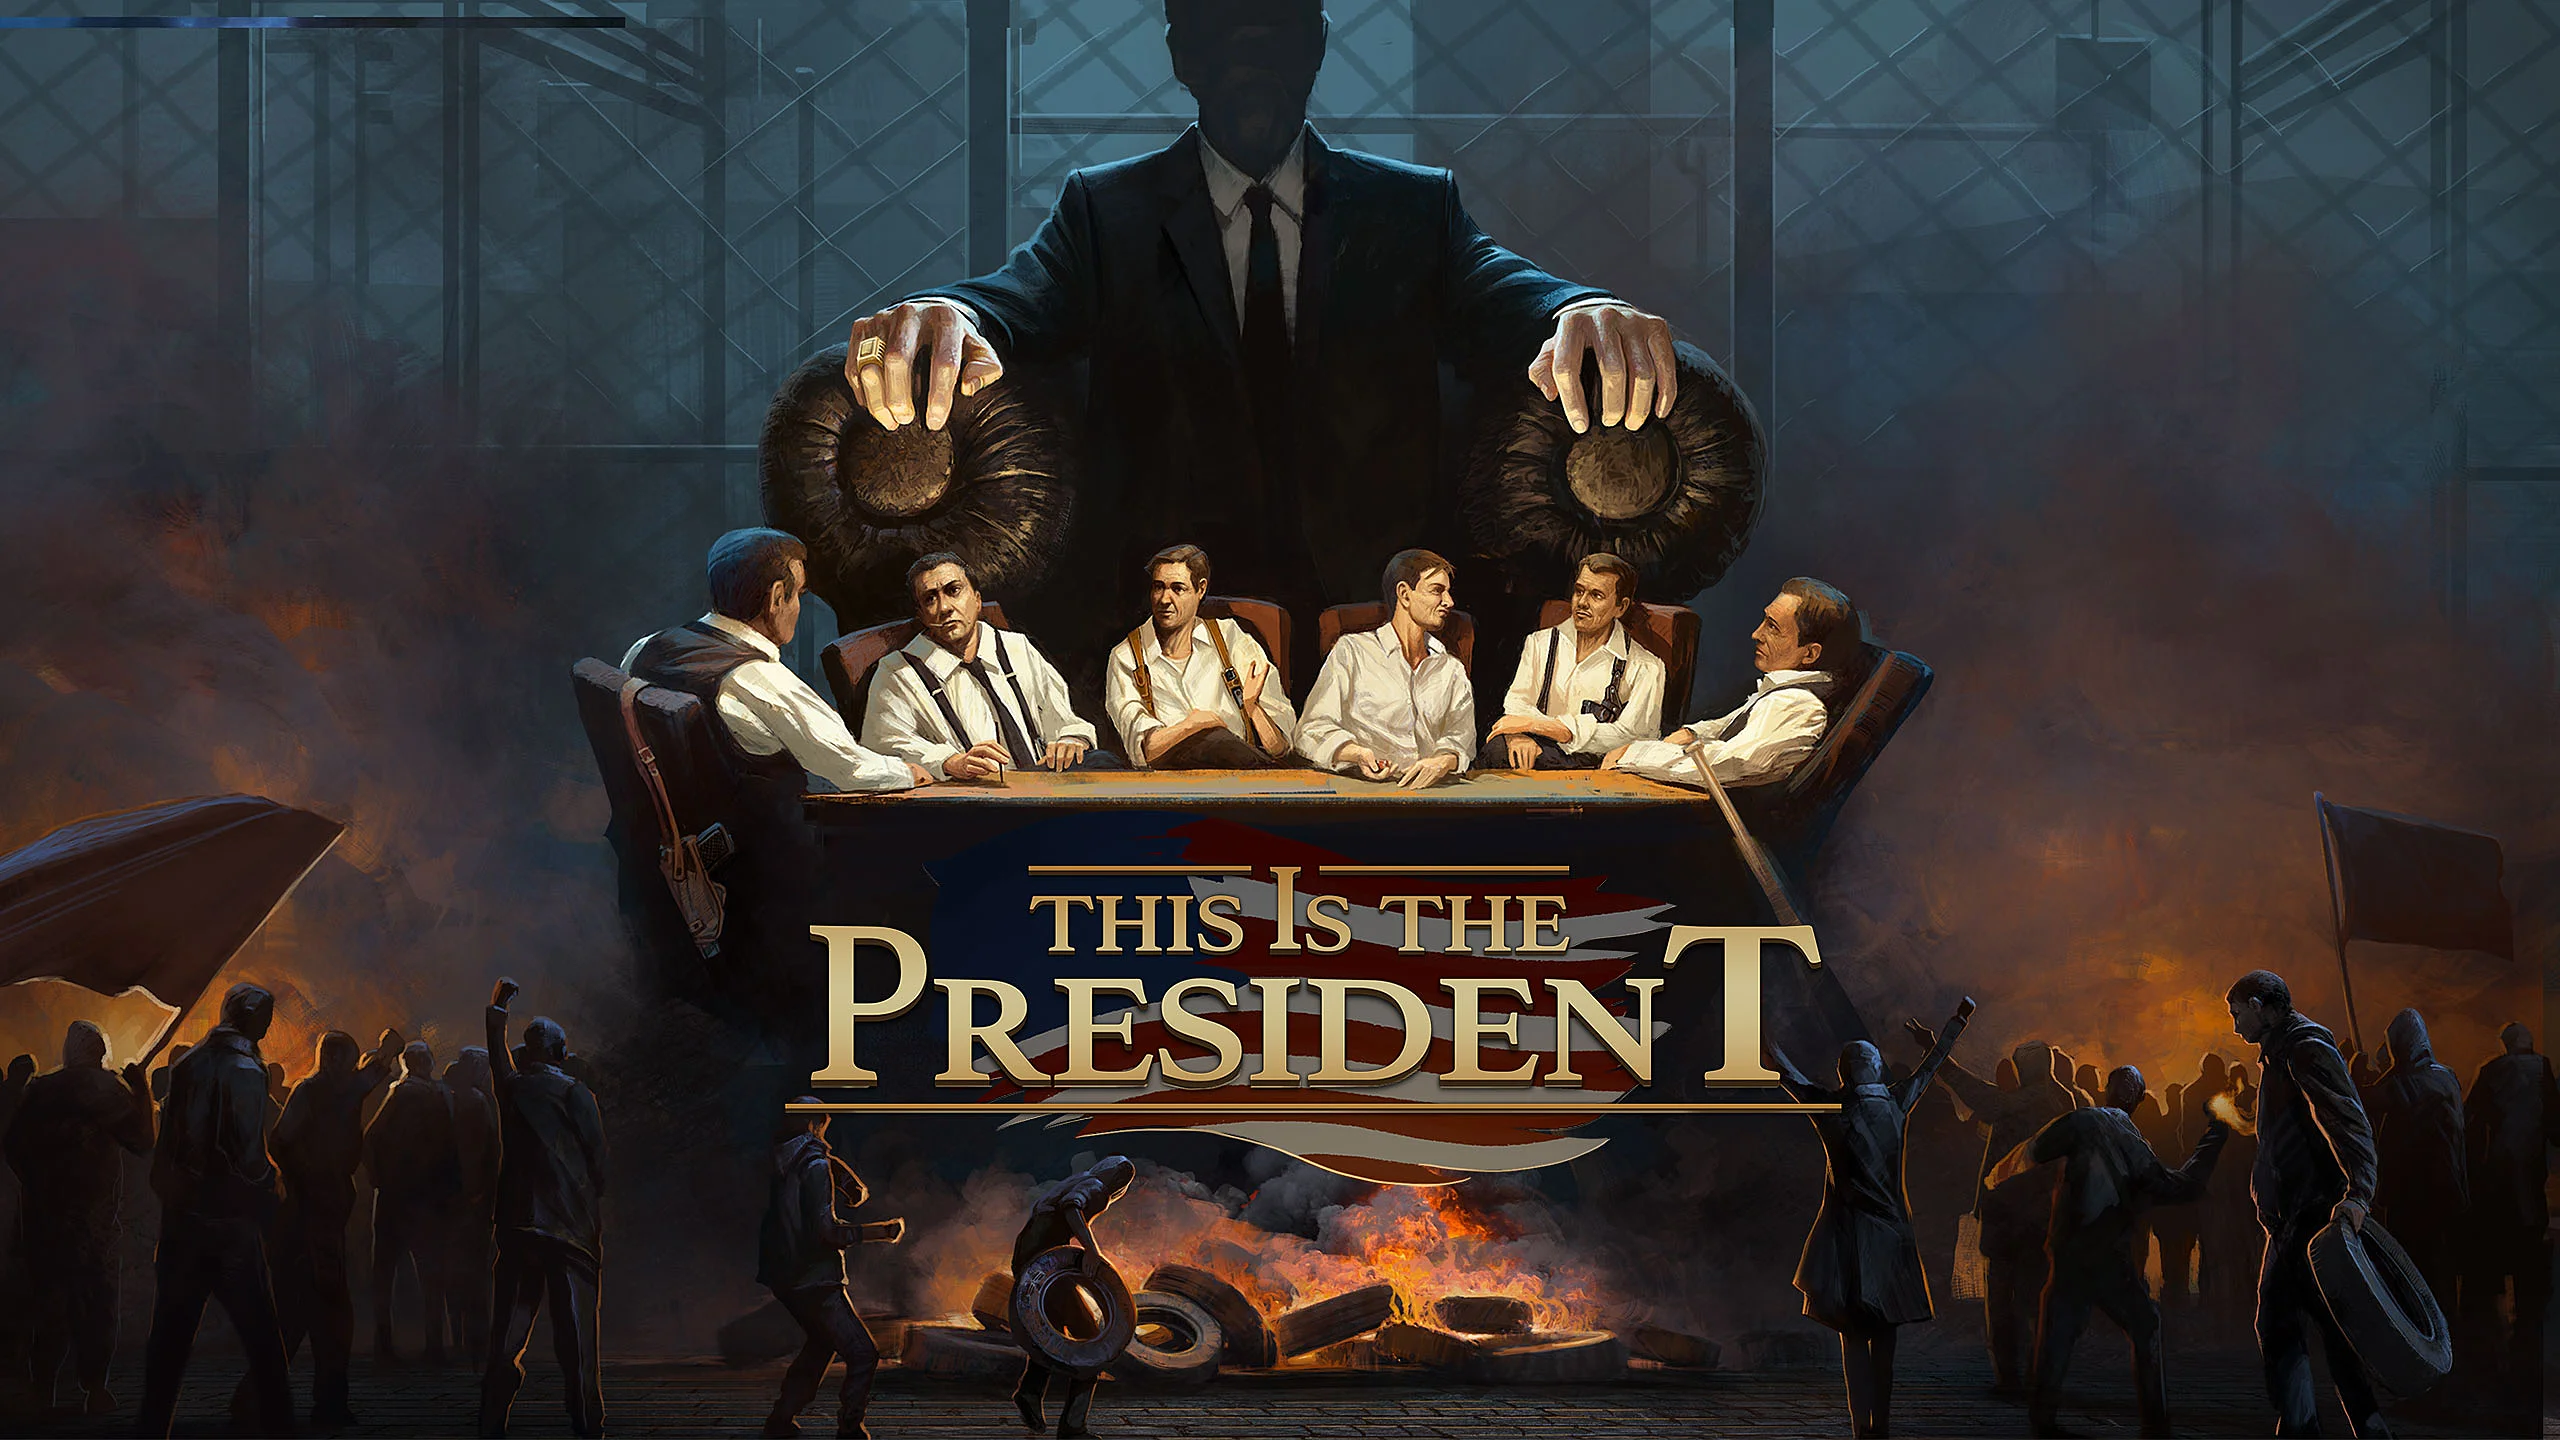 Análisis: This is the President 1